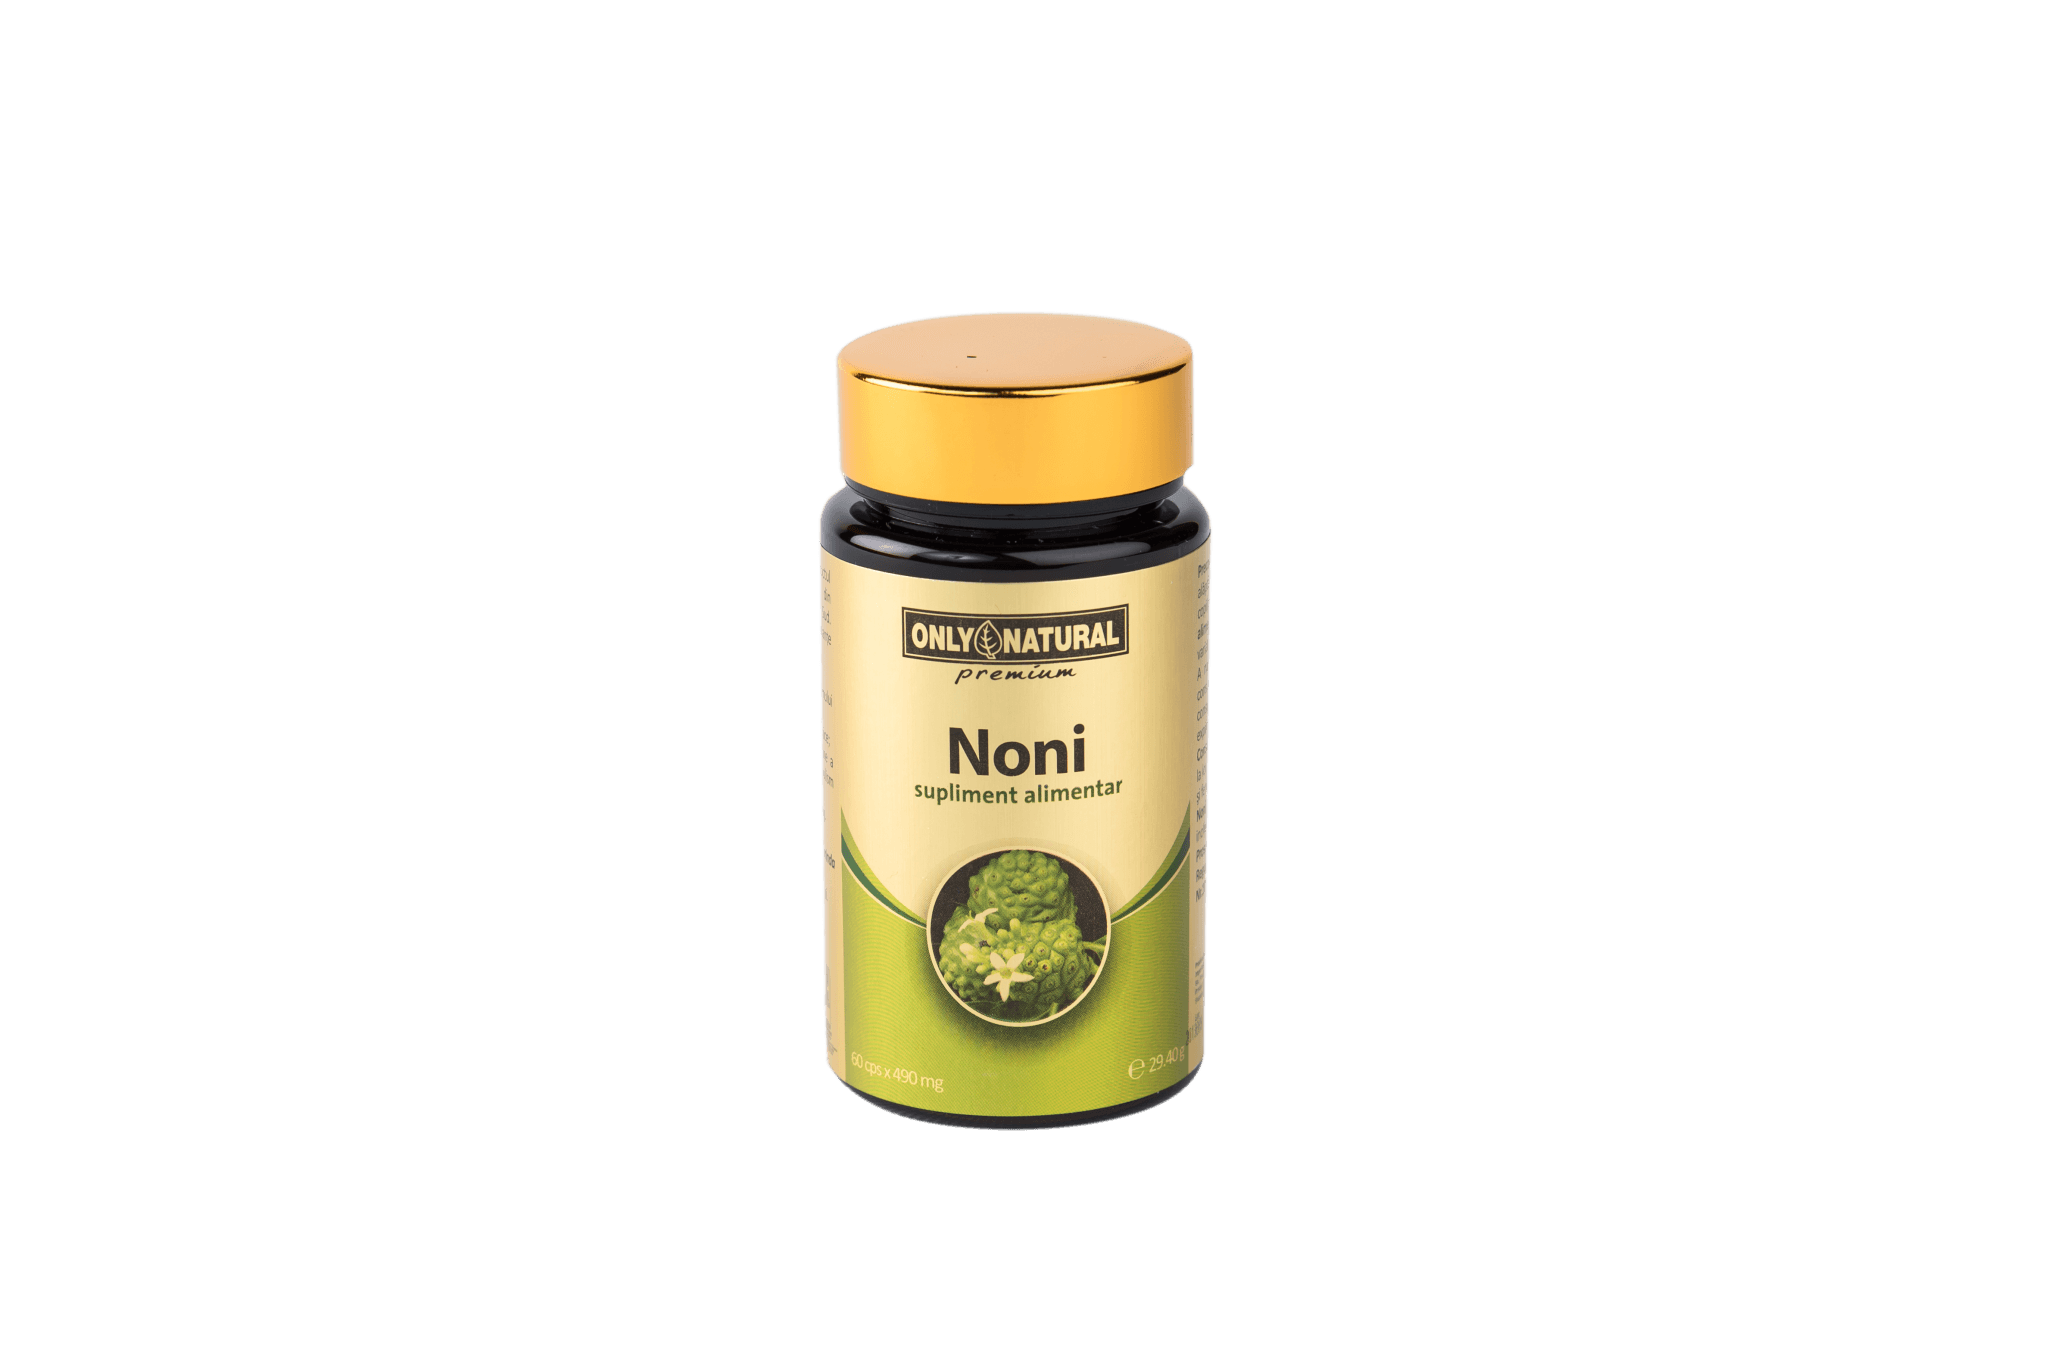 ONLY NATURAL NONI X 60 CAPSULE Helpnet.ro